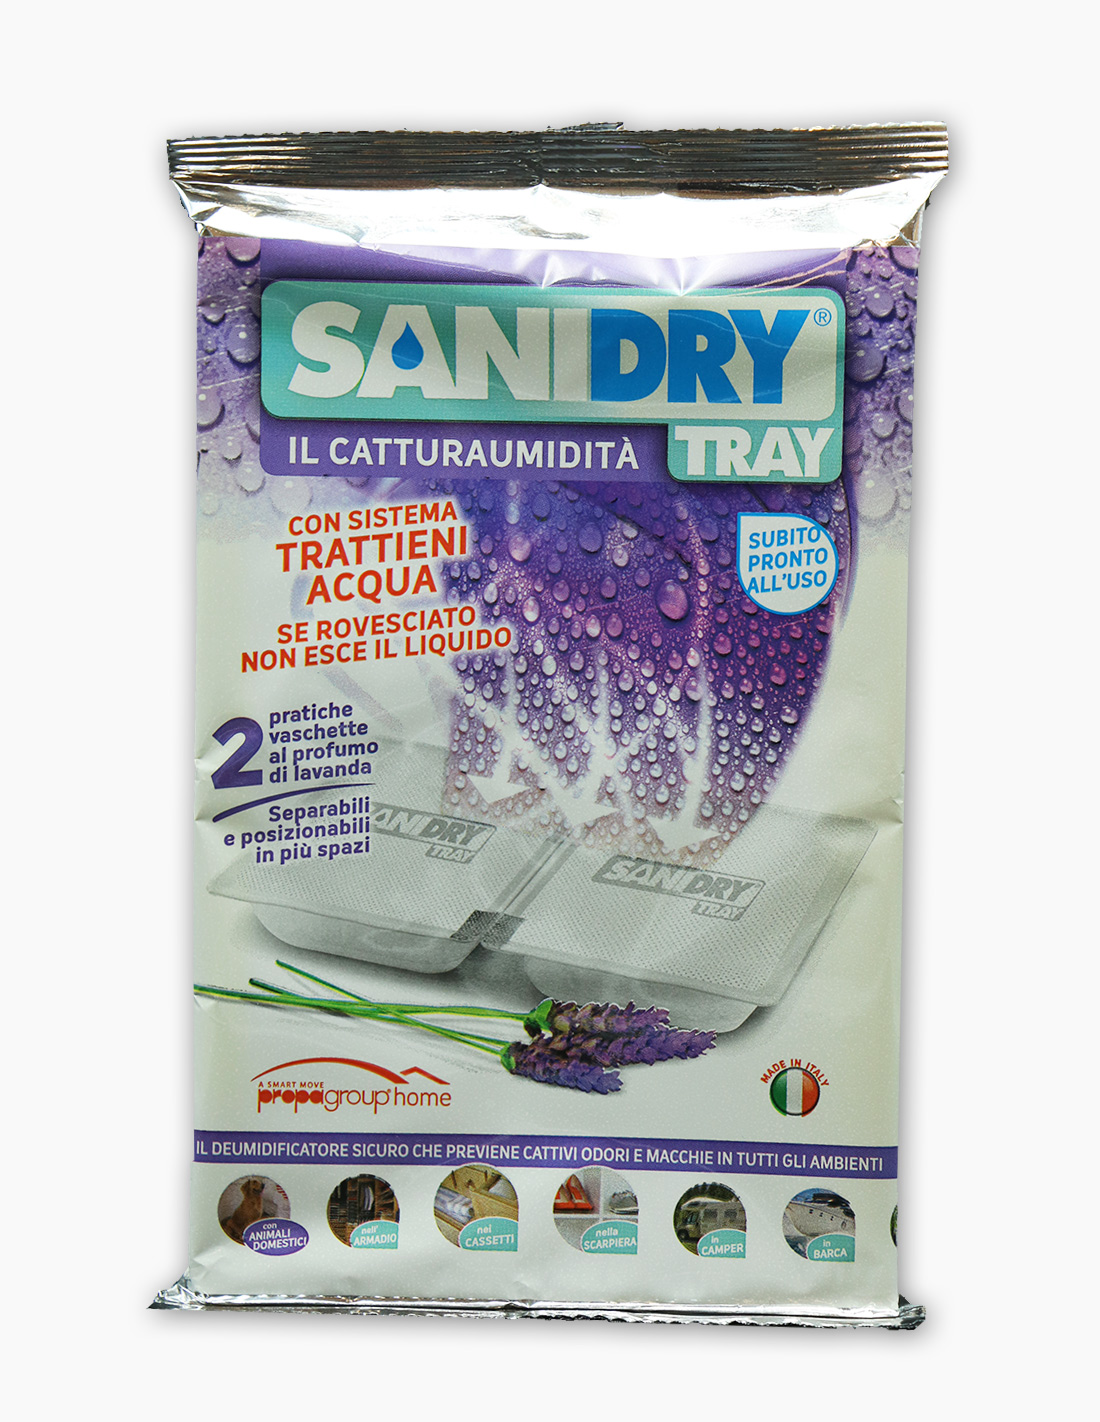 Moisture Absorbing Sachets for Home, Car, Boats and Caravans.